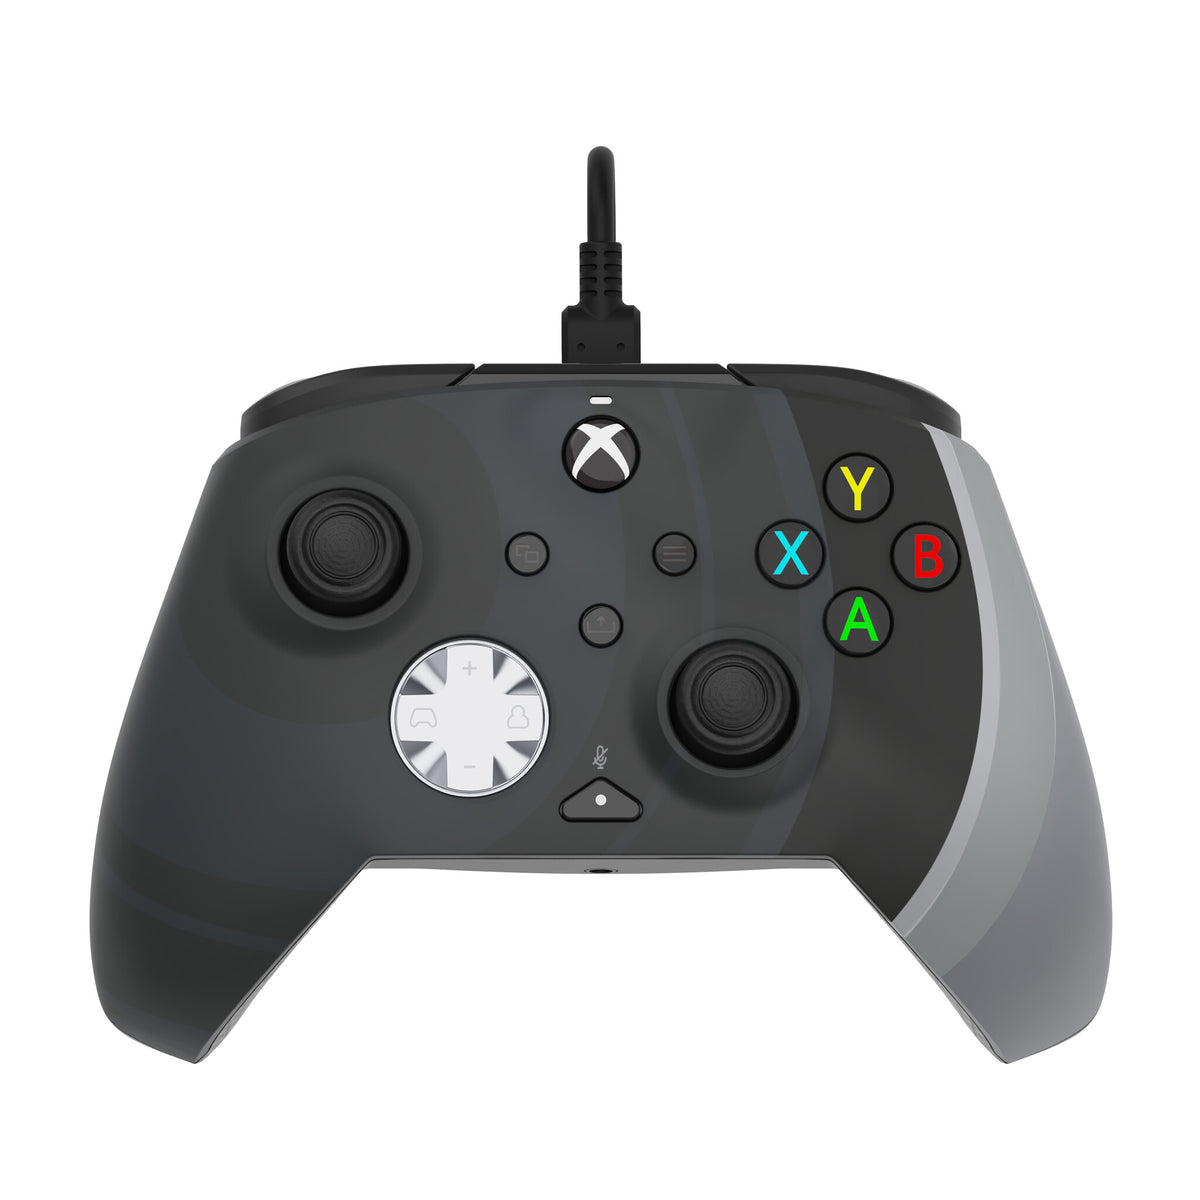 PDP Rematch - USB Wired Gamepad for PC / Xbox Series X|S in Radial Black